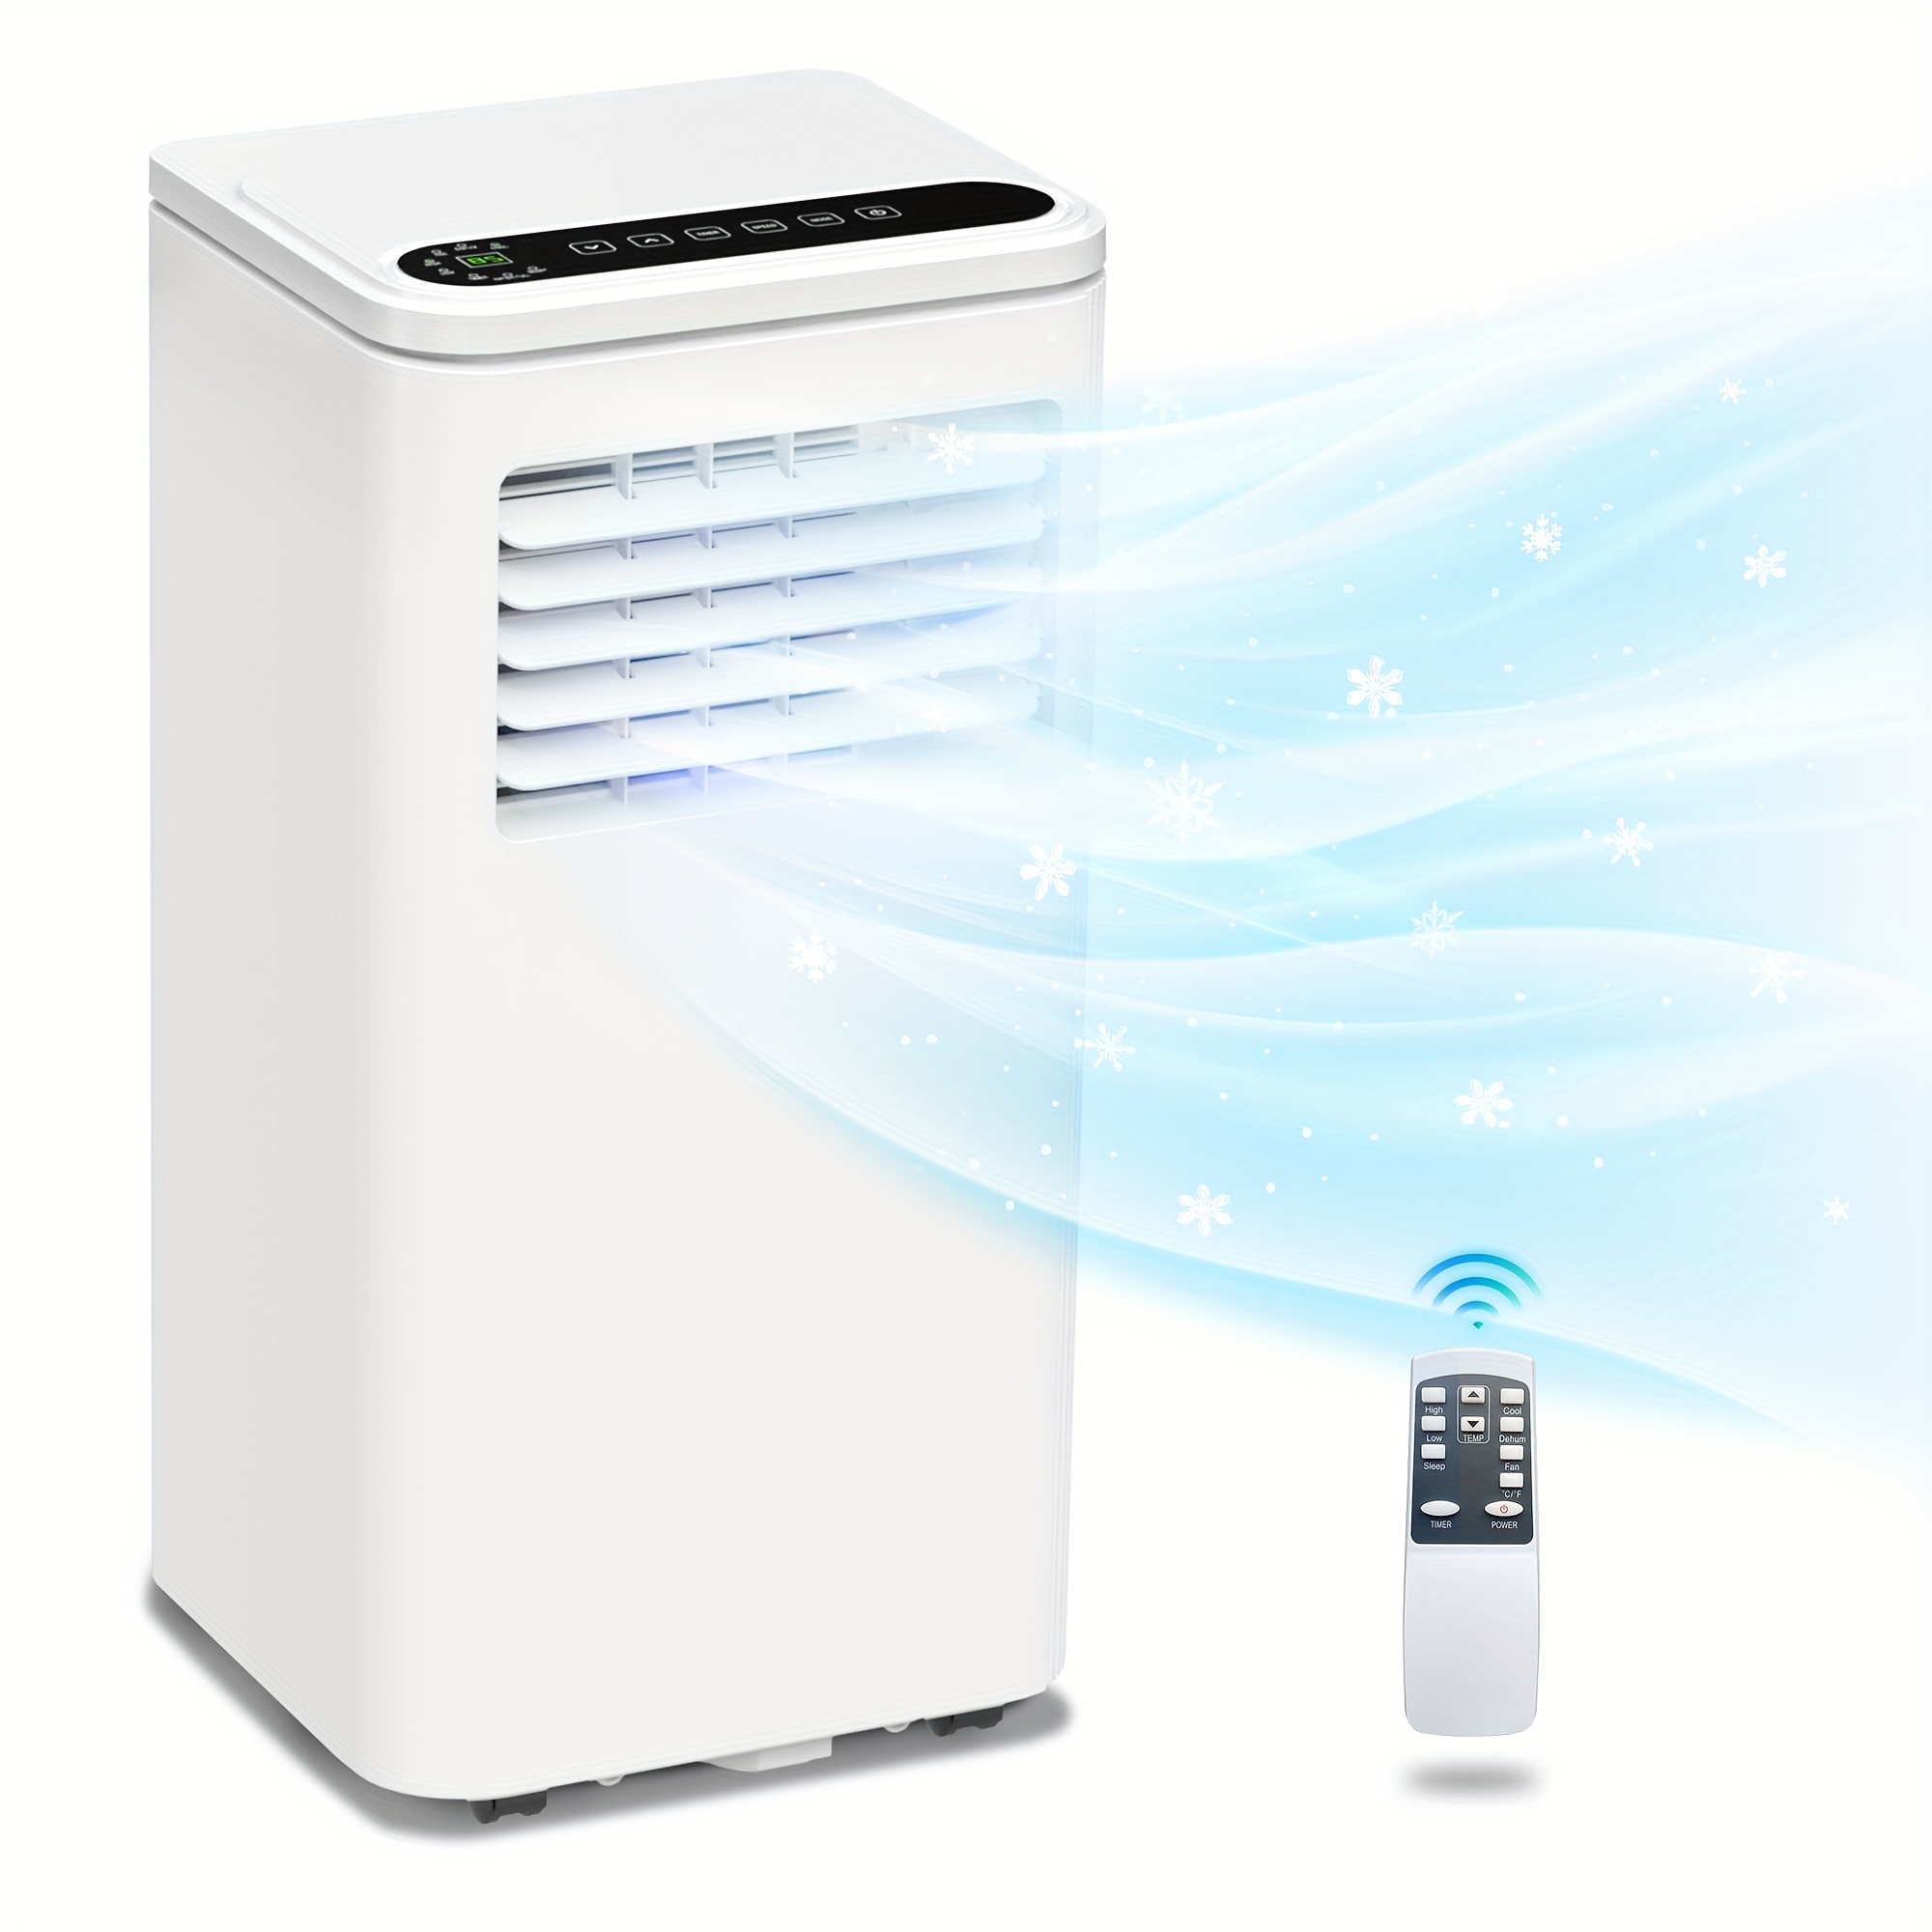 

1pc Portable Air Conditioner 8000 Btu (ashrae) For Room Cooling Up To 250 Sq.ft, 24h Timer Room Ac W/remote Control, White